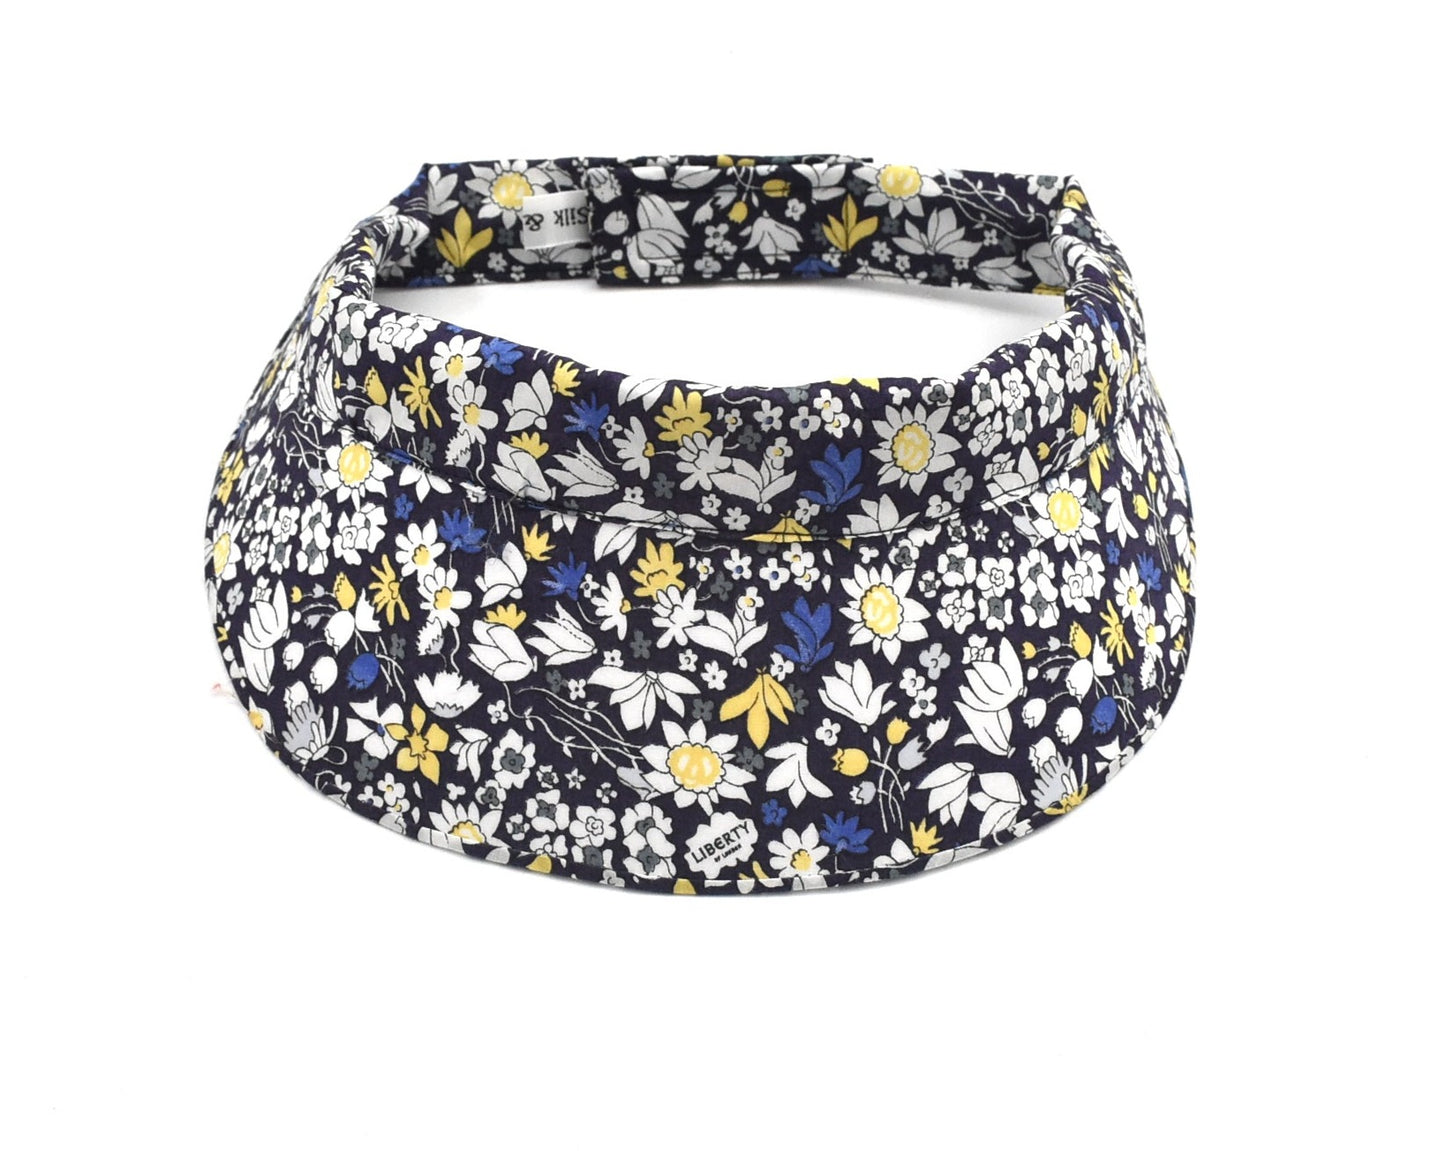 Sun Visor in Liberty of London Yellow and Navy Blue Floral print